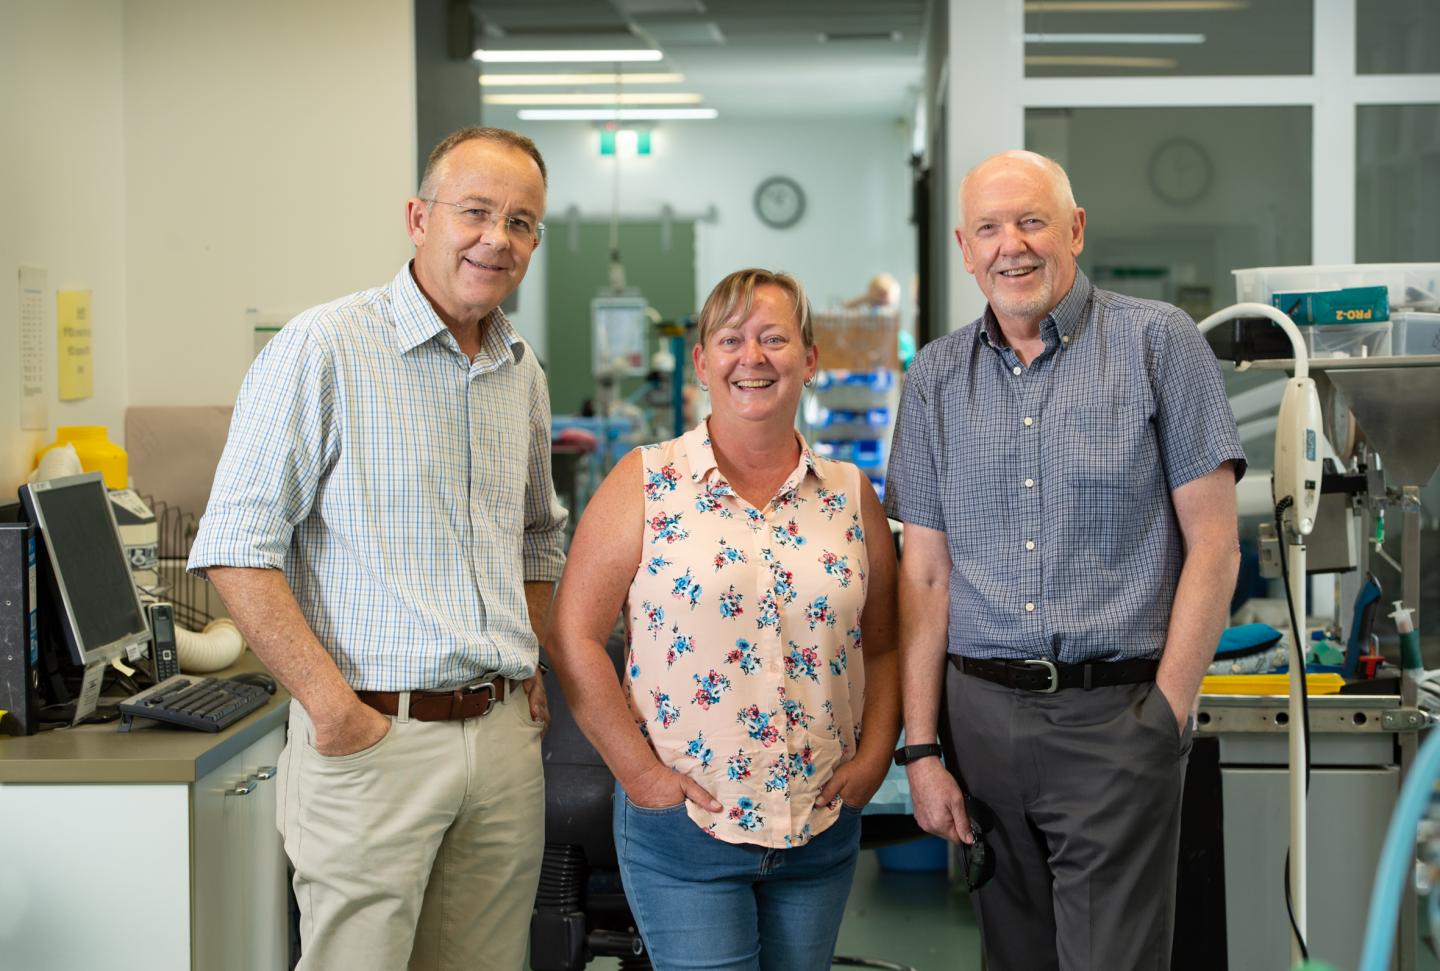 QUT and UQ Researchers Who Have Developed a New Koala Chlamydia Test